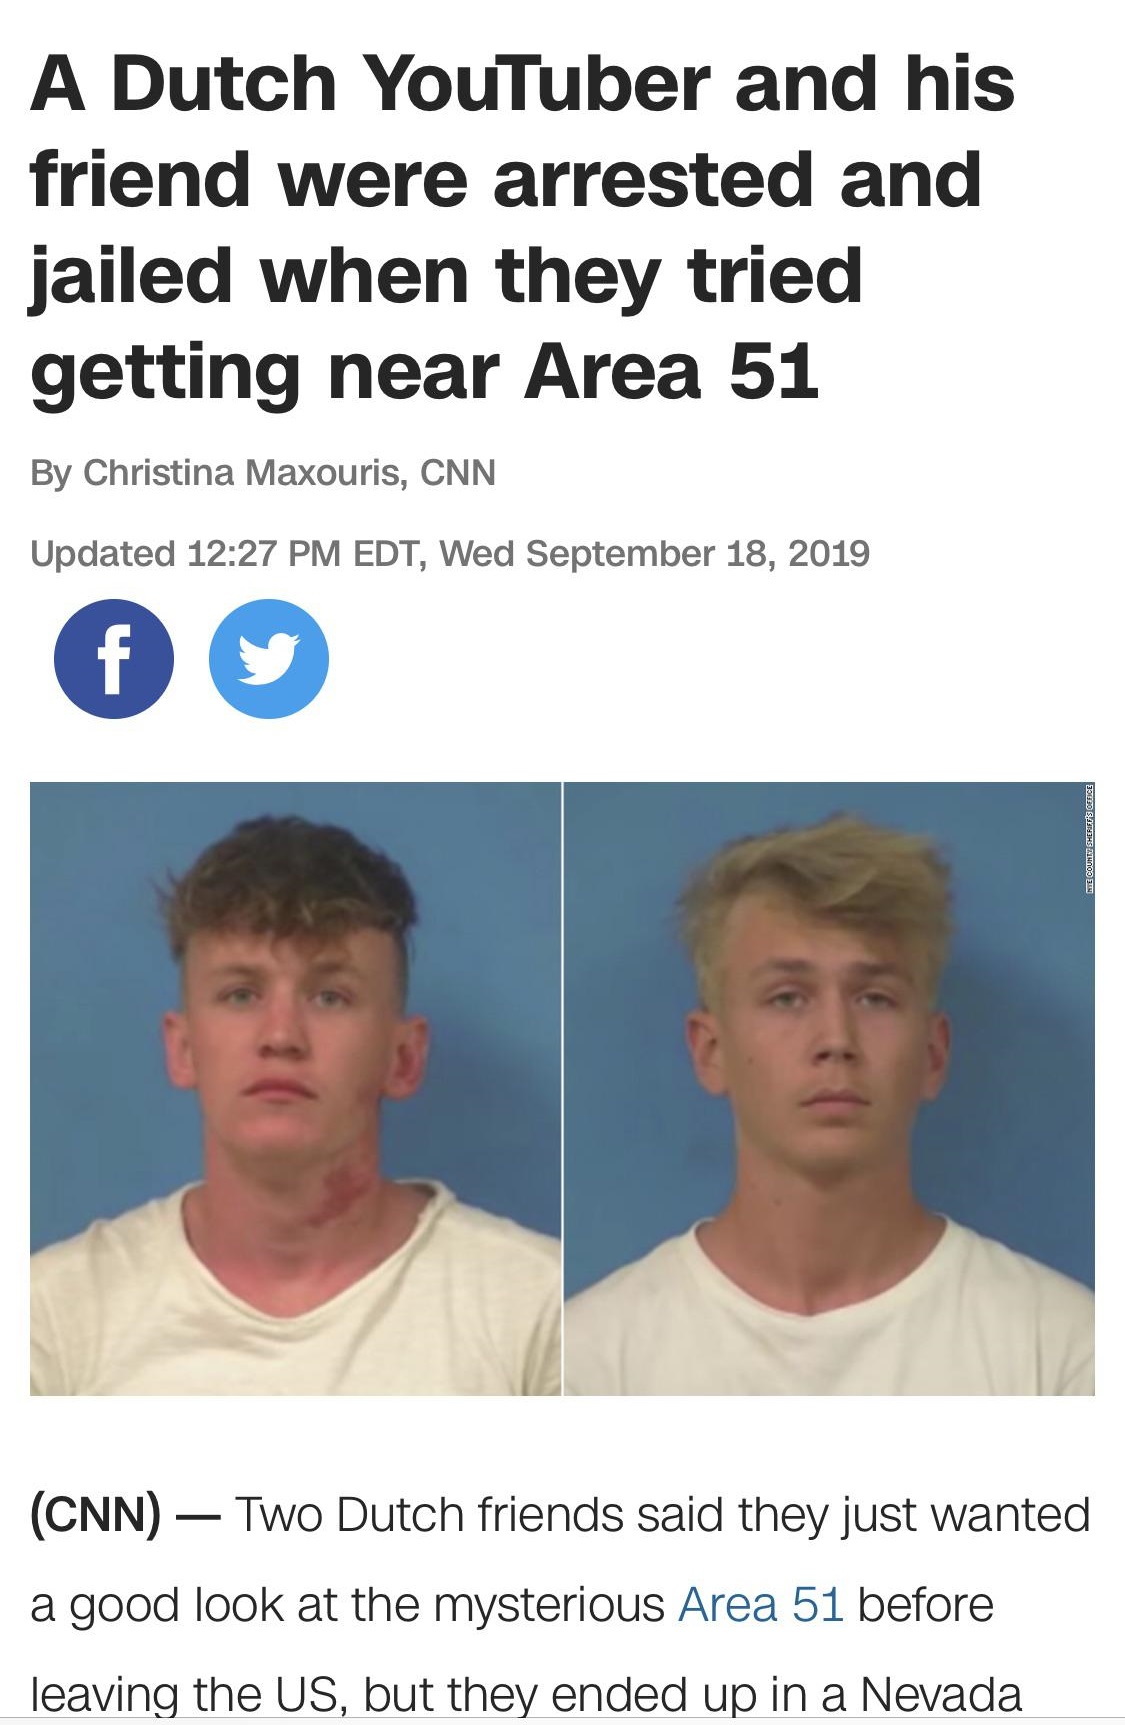 penis hat - A Dutch YouTuber and his friend were arrested and jailed when they tried getting near Area 51 By Christina Maxouris, Cnn Updated Edt, Wed f He County Sheriff'S Office Cnn Two Dutch friends said they just wanted a good look at the mysterious Ar